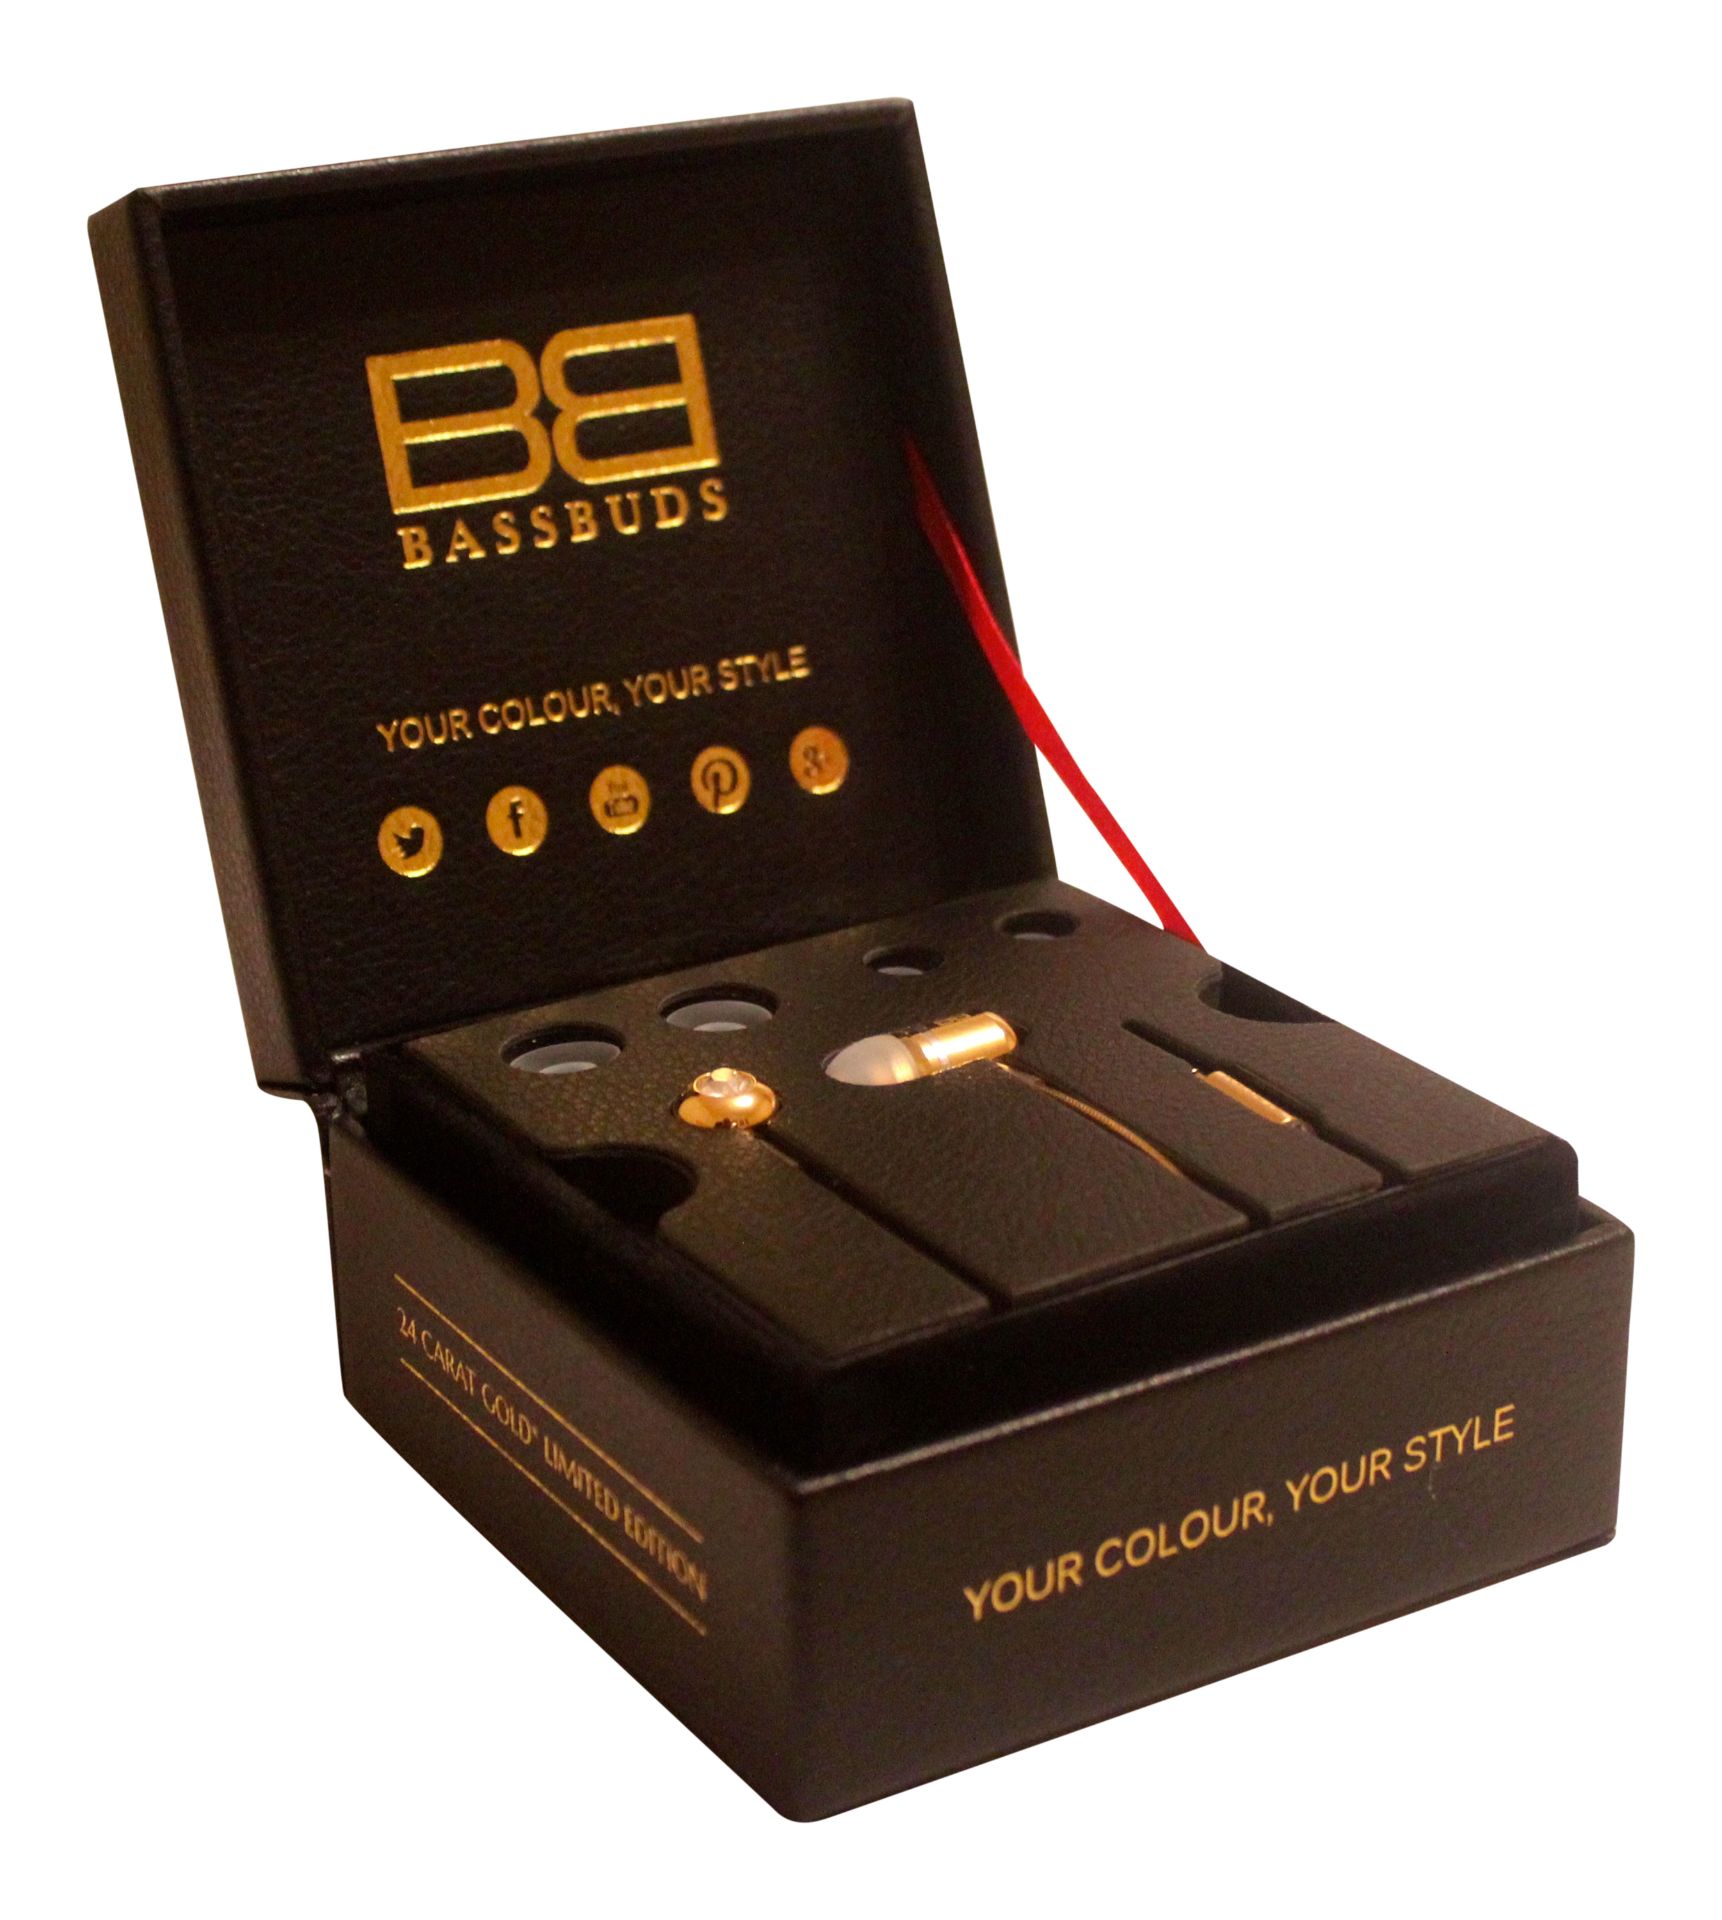 24ct Gold Plated BassBuds with Swarovski Crystal In-Ear Earphones x 1 Unit - Image 2 of 5